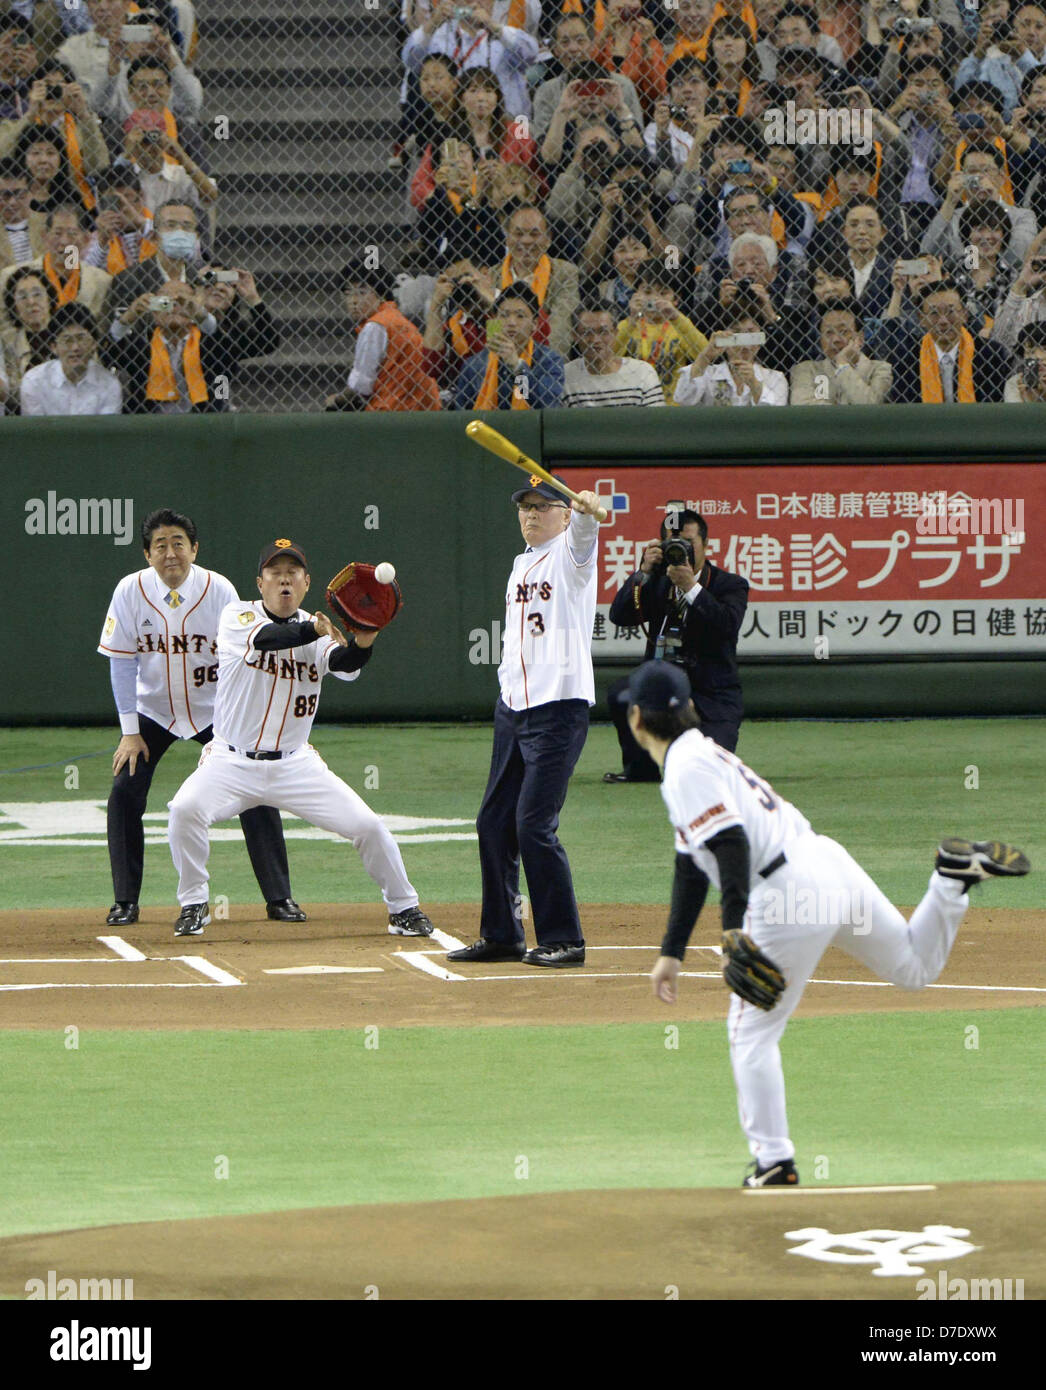 May 5, 2013 - Tokyo, Japan - Former Yomiuri Giants manager Shigeo Nagashima swings a bat as current Giants manager Tatsunori Hara is going to catch the ball thrown as a ceremonial first pitch by former Giants and New York Yankees outfielder Hideki Matsui, right, while Japanese Prime Minister Shinzo Abe, left, plays a role of an umpire prior to the Giants' game against the Hiroshima Carp at Tokyo Dome in Tokyo Sunday, April 5, 2013. Matsui and Nagashima received the People's Honor Award from Abe at an elaborate ceremony before the game. (Credit Image Â©Yoshikazu Okunishi,, Pool)/Jana Press/ZUMA Stock Photo